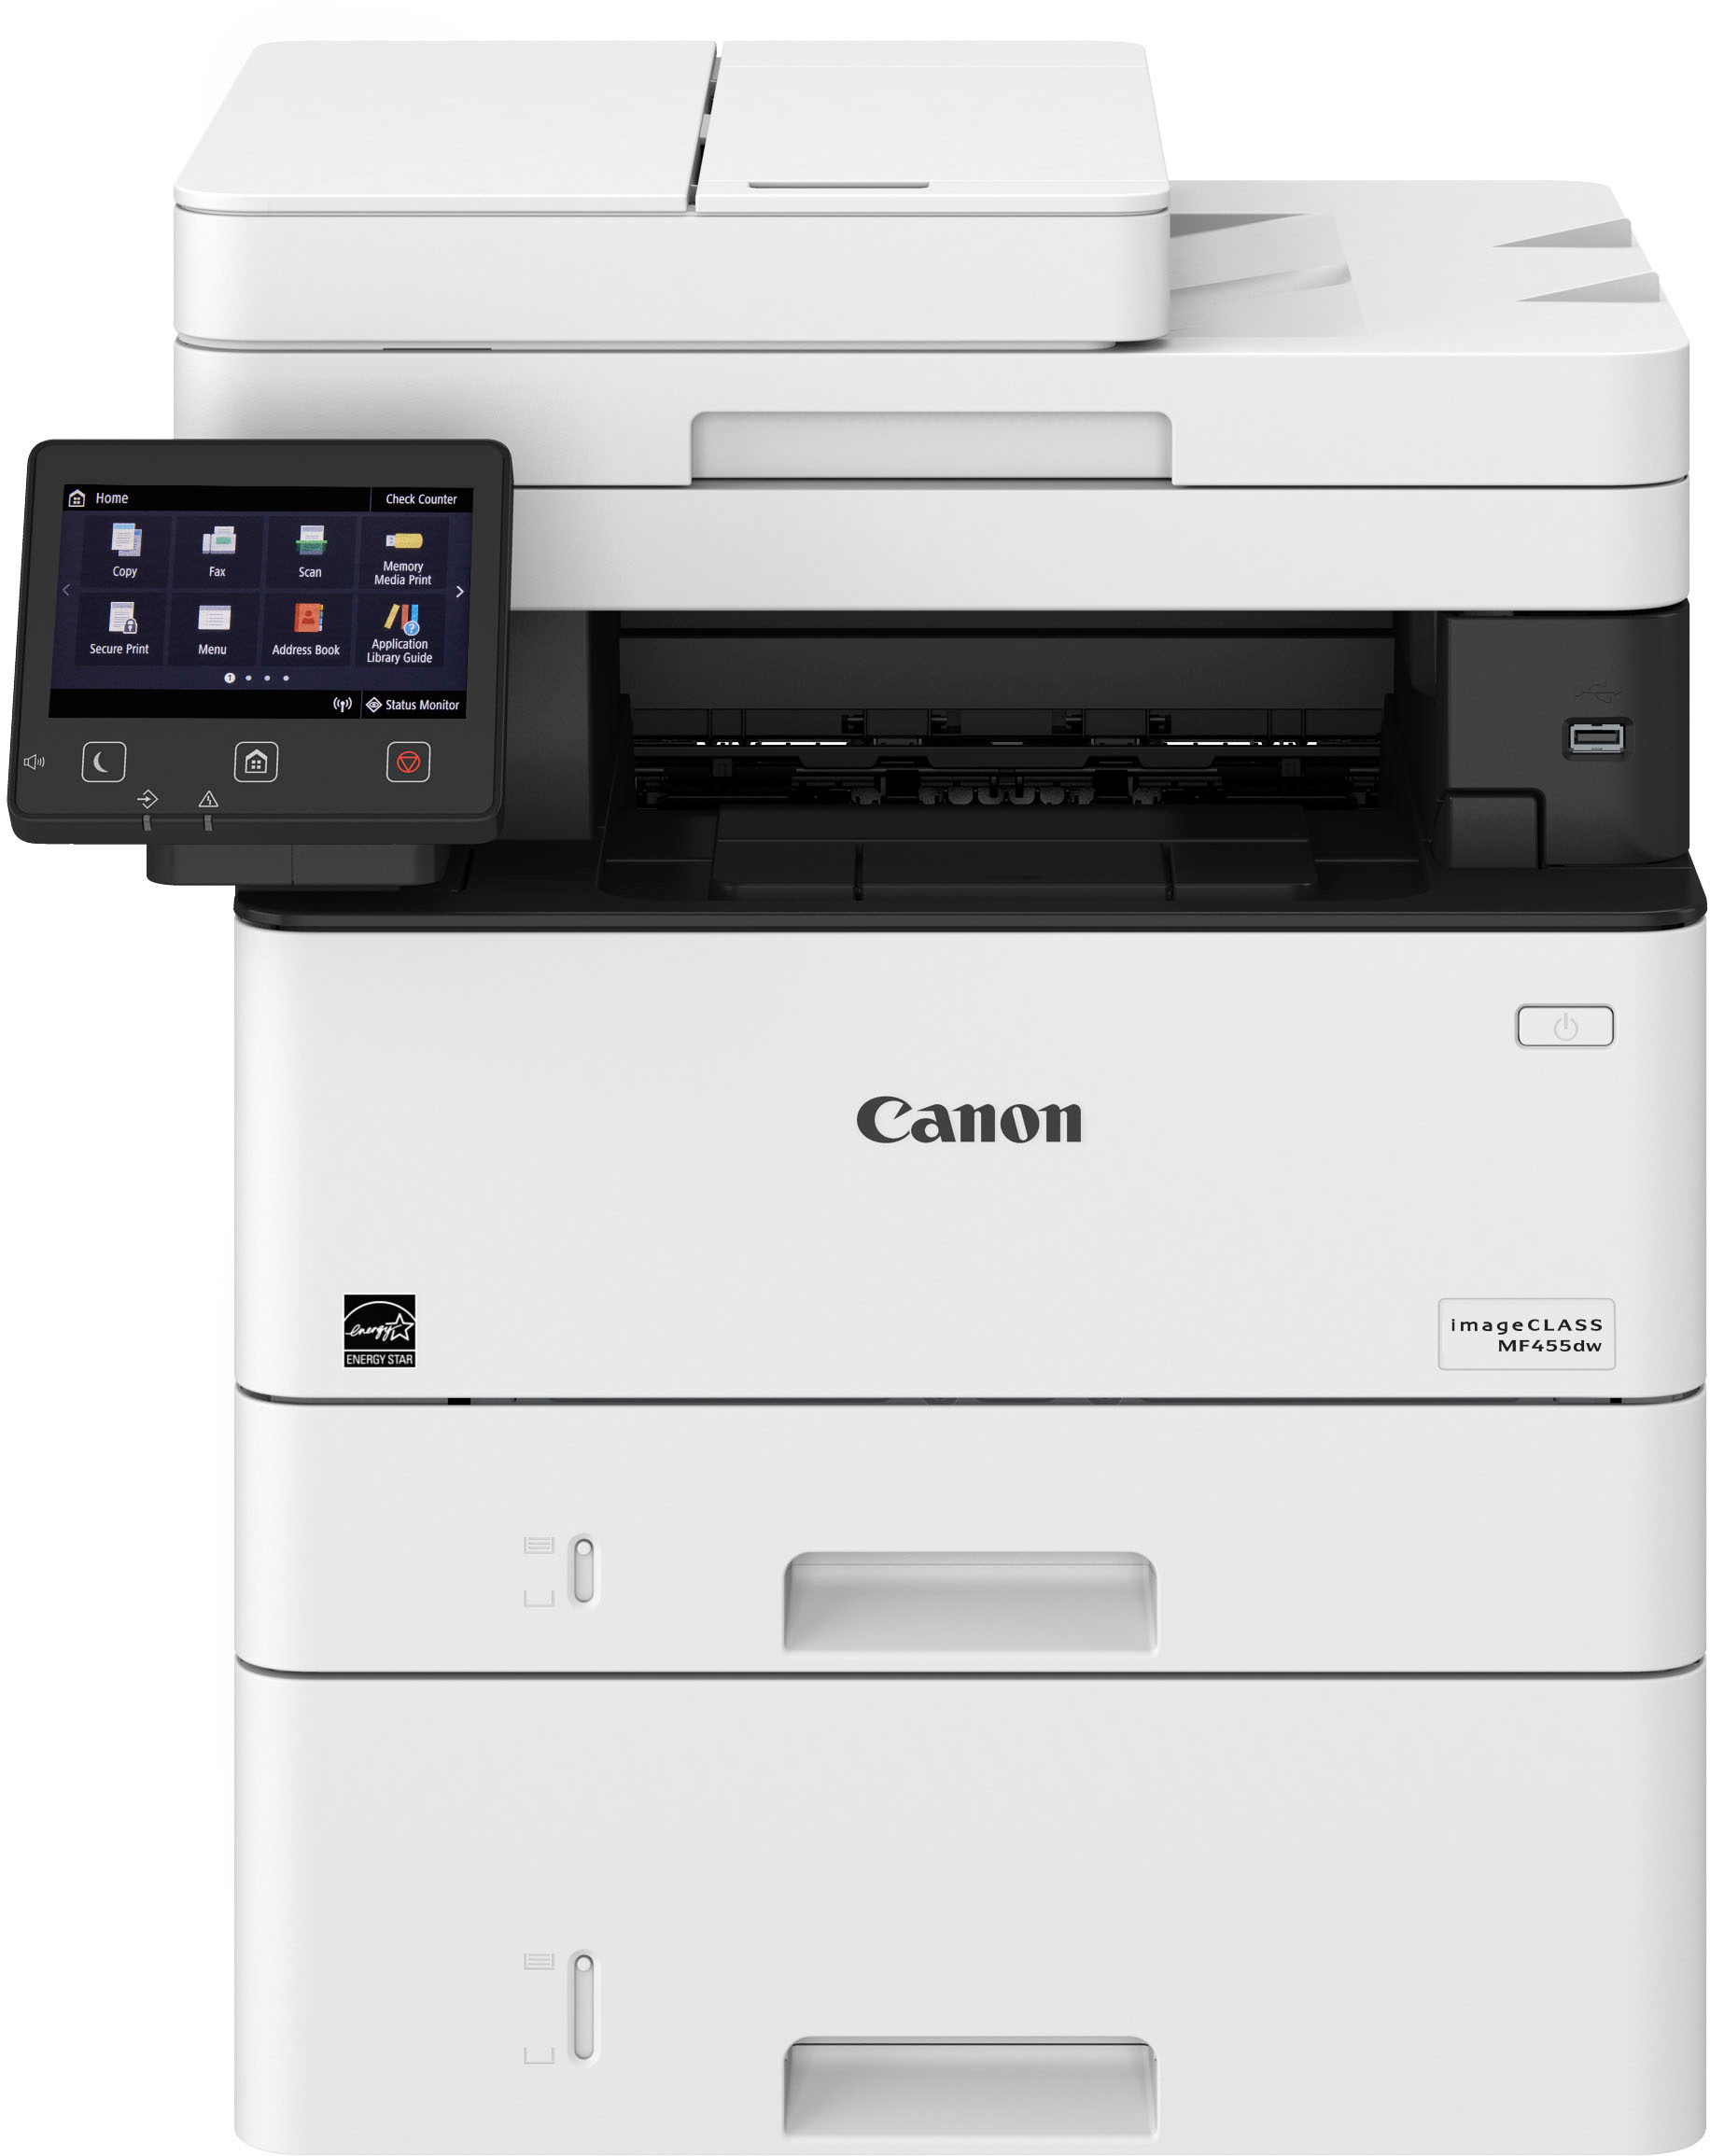 Canon imageCLASS MF455dw Wireless Black-and-White All-In-One Laser Printer with Fax White 5161C005